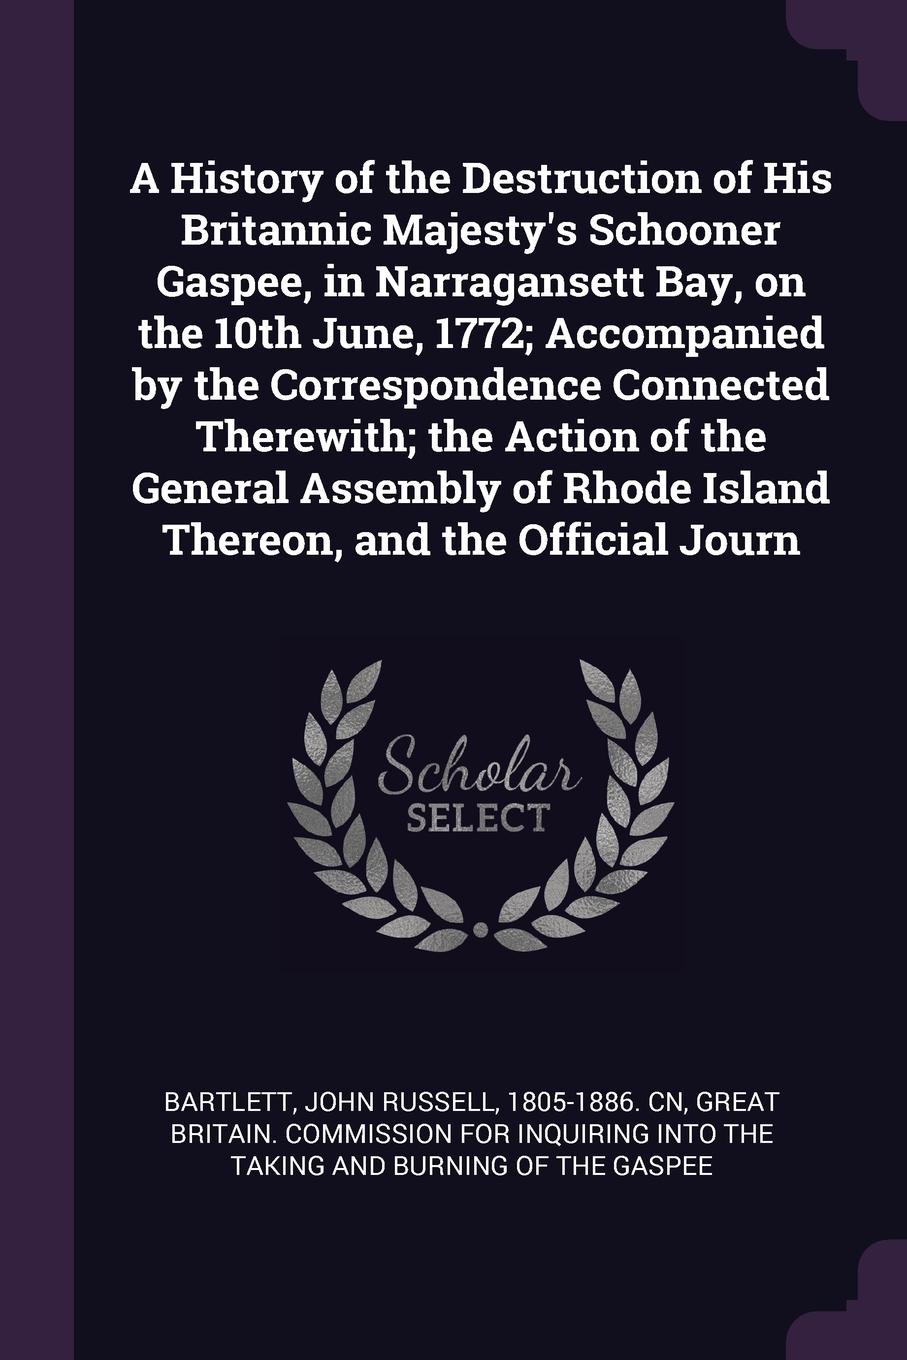 A History of the Destruction of His Britannic Majesty`s Schooner Gaspee, in Narragansett Bay, on the 10th June, 1772; Accompanied by the Correspondence Connected Therewith; the Action of the General Assembly of Rhode Island Thereon, and the Offici...